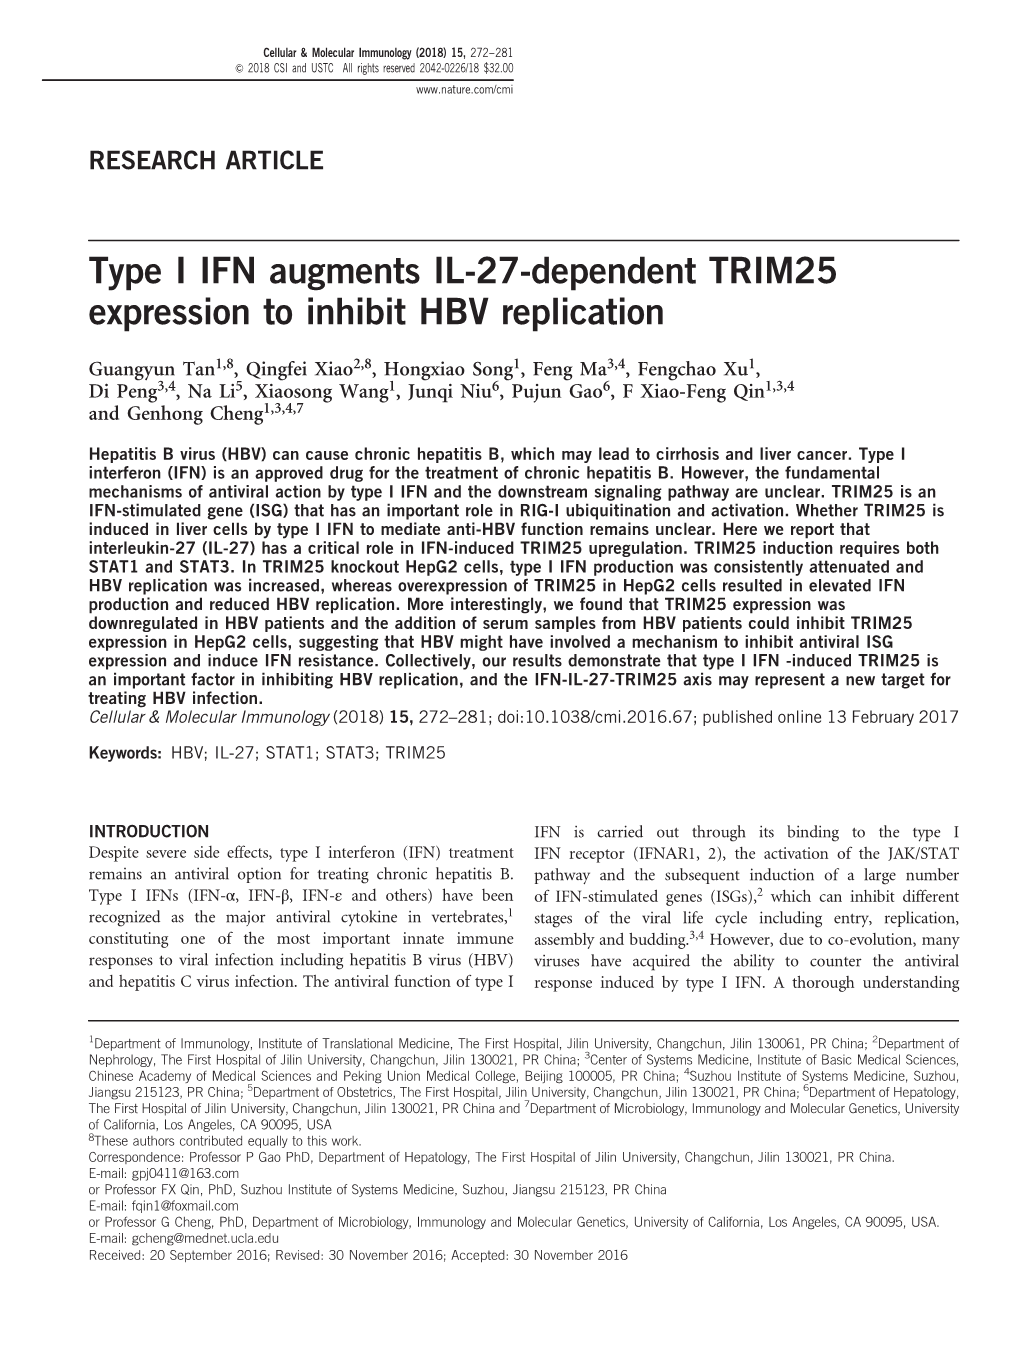 Type I IFN Augments IL-27-Dependent TRIM25 Expression to Inhibit HBV Replication